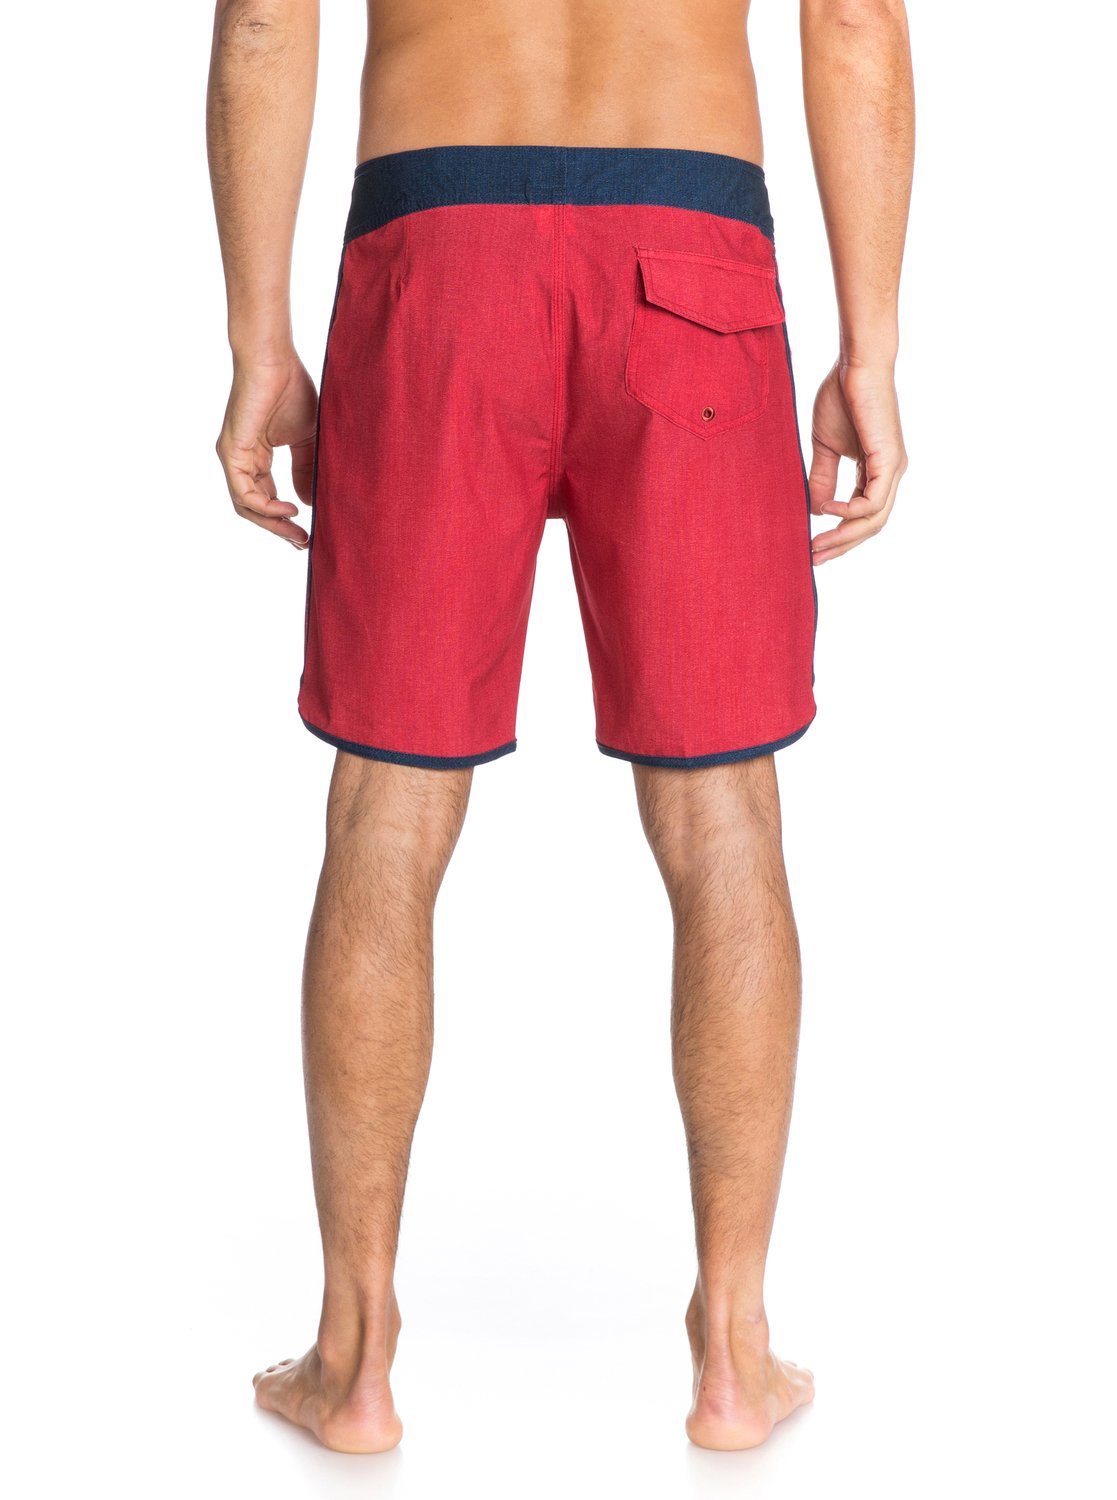 Scallop Solid 18” Boardshorts AQYBS03015 | Quiksilver